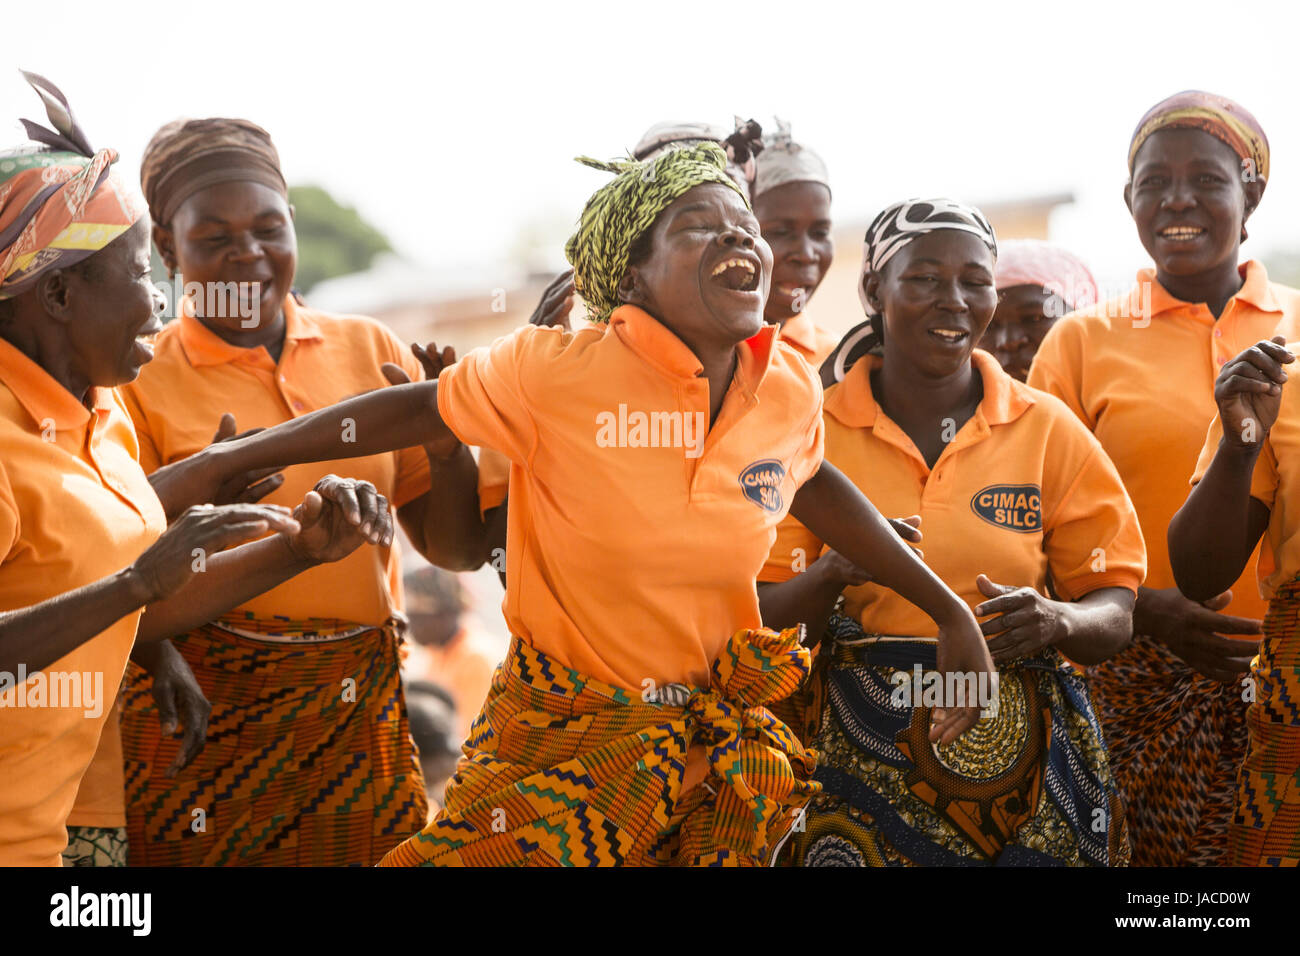 Members of women’s SILC group (Savings and Internal Lending Community) dance together during a meeting Upper East Region, Ghana. Stock Photo